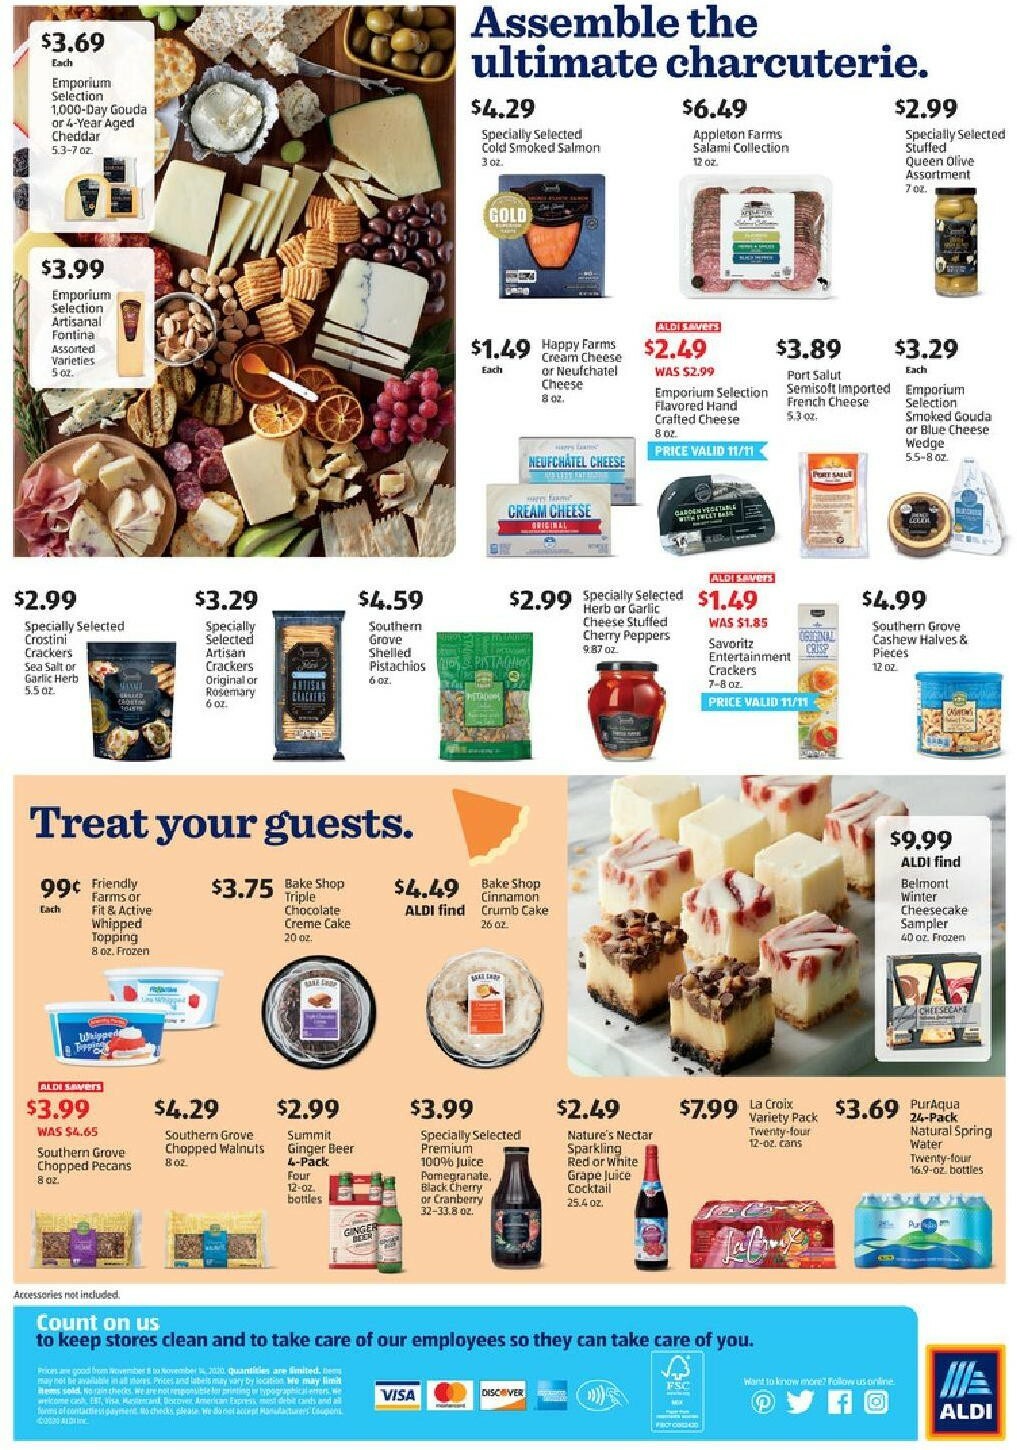 ALDI US - Weekly Ads & Special Buys from November 8 - Page 8